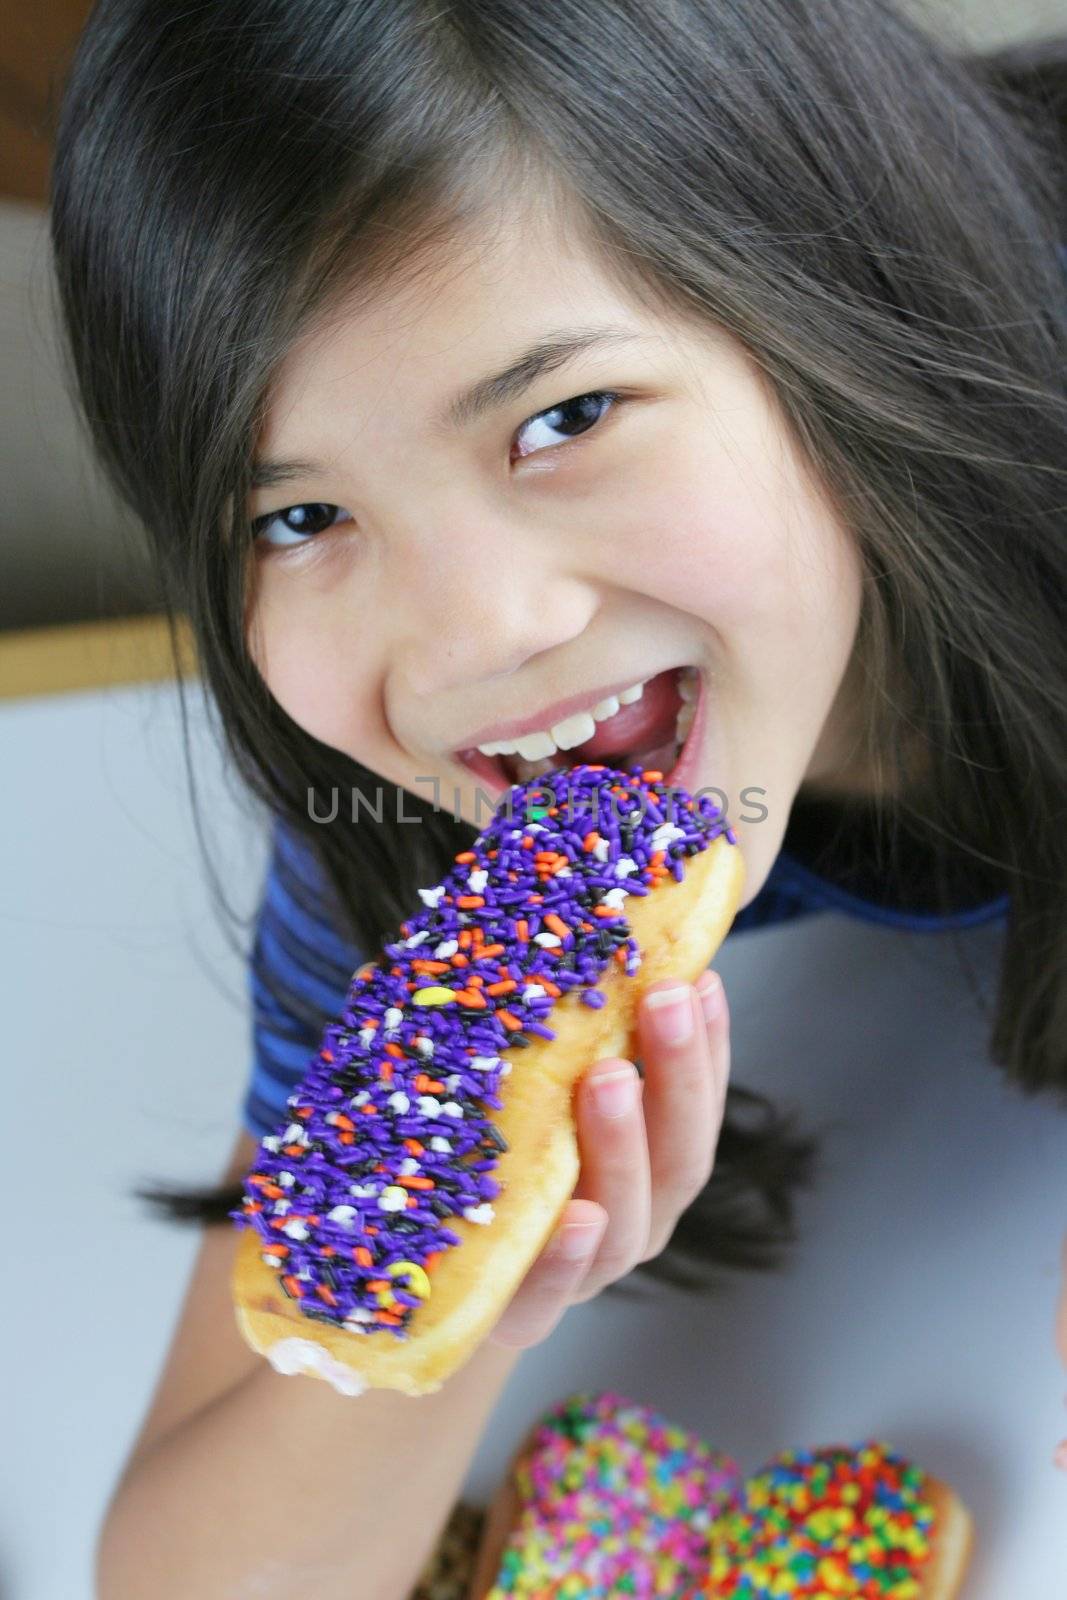 Girl holding colorful donut, ready to eat; by jarenwicklund